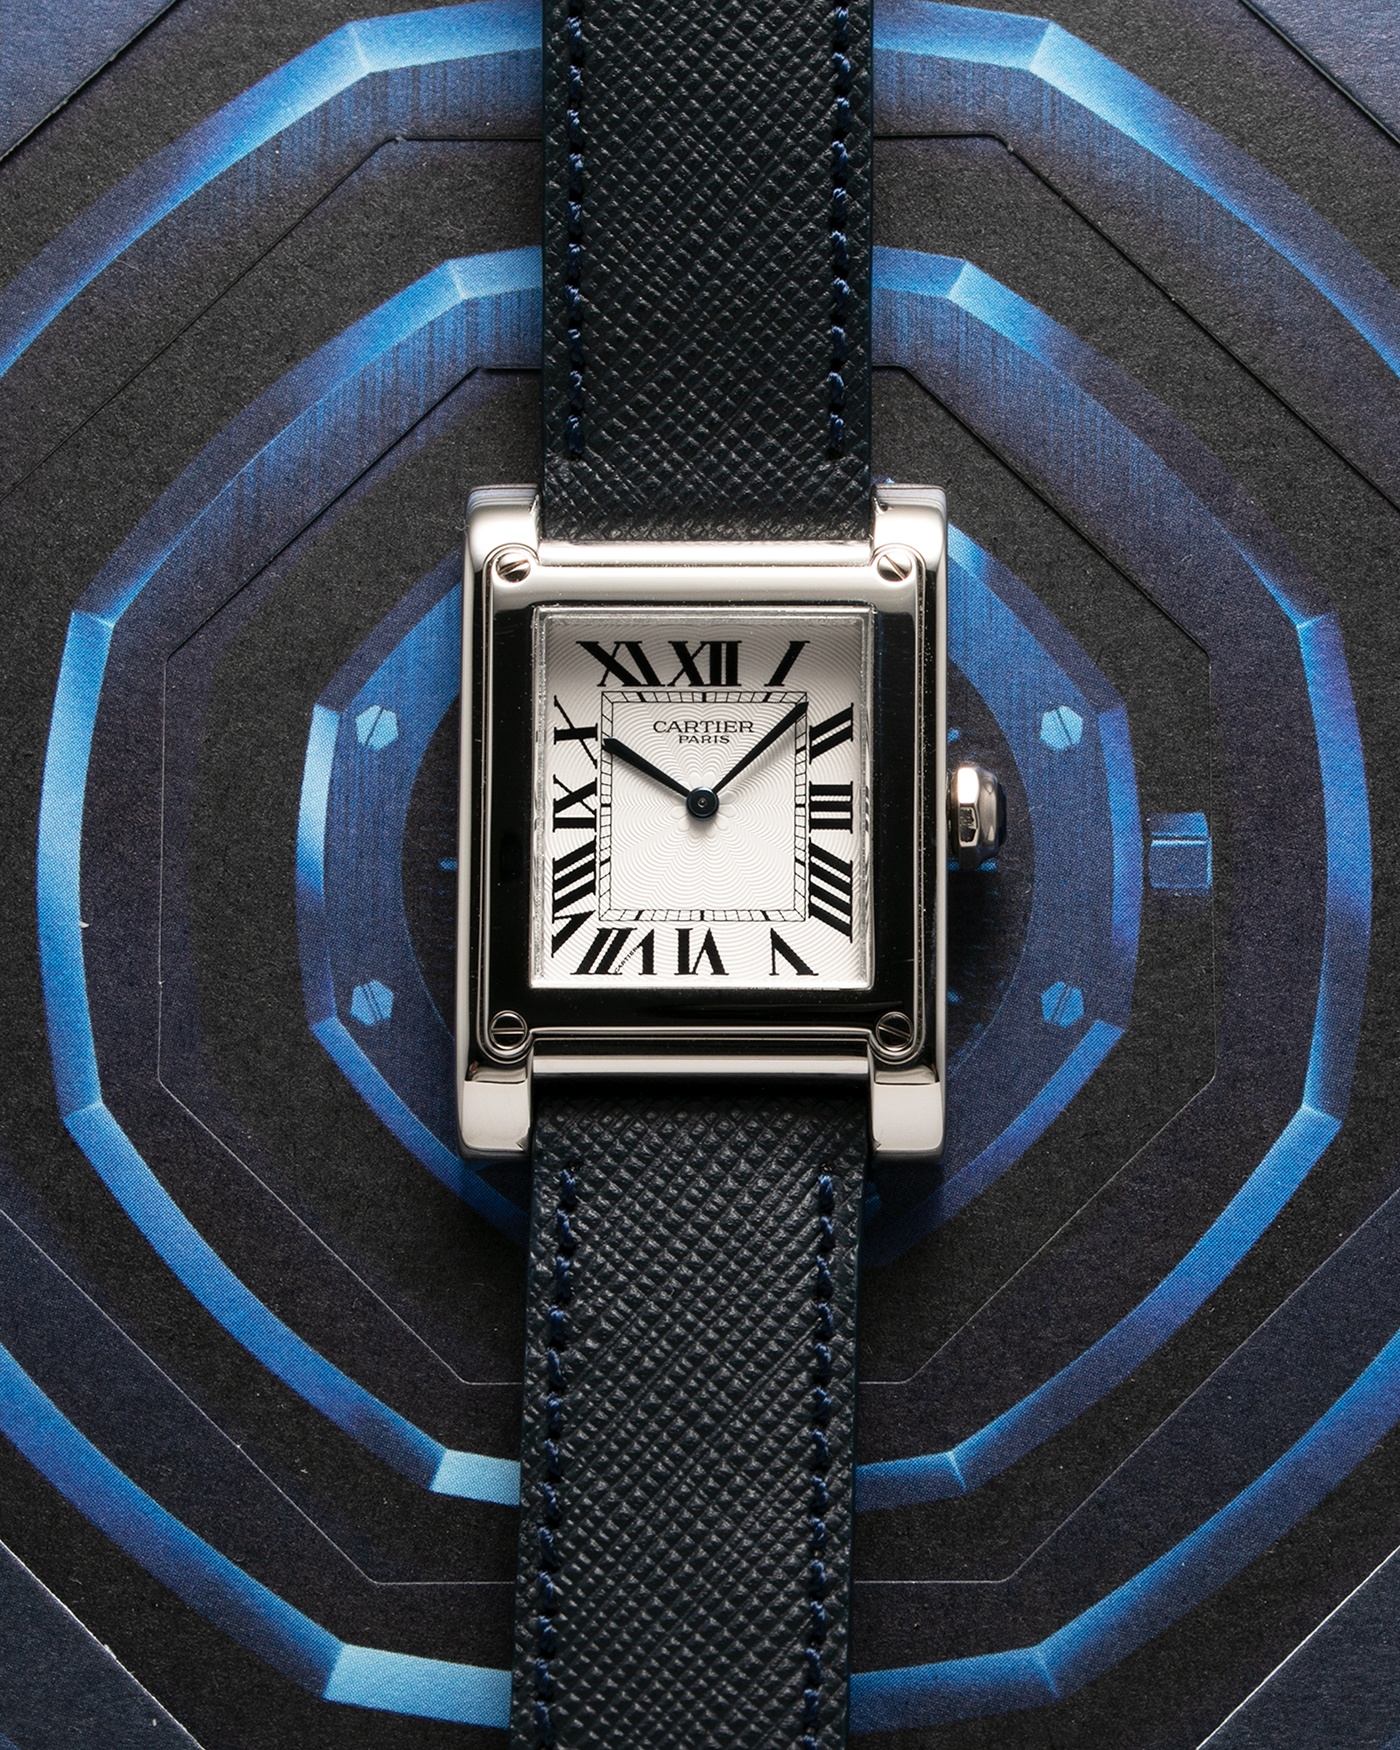 Brand: Cartier Year: 2000’s Model: Tank A Vis Material: Platinum Movement: Cartier 437MC Case Diameter: 26mm X 39mm Strap: Molequin Navy Blue Textured Calf and 18k White Gold Deployant Clasp